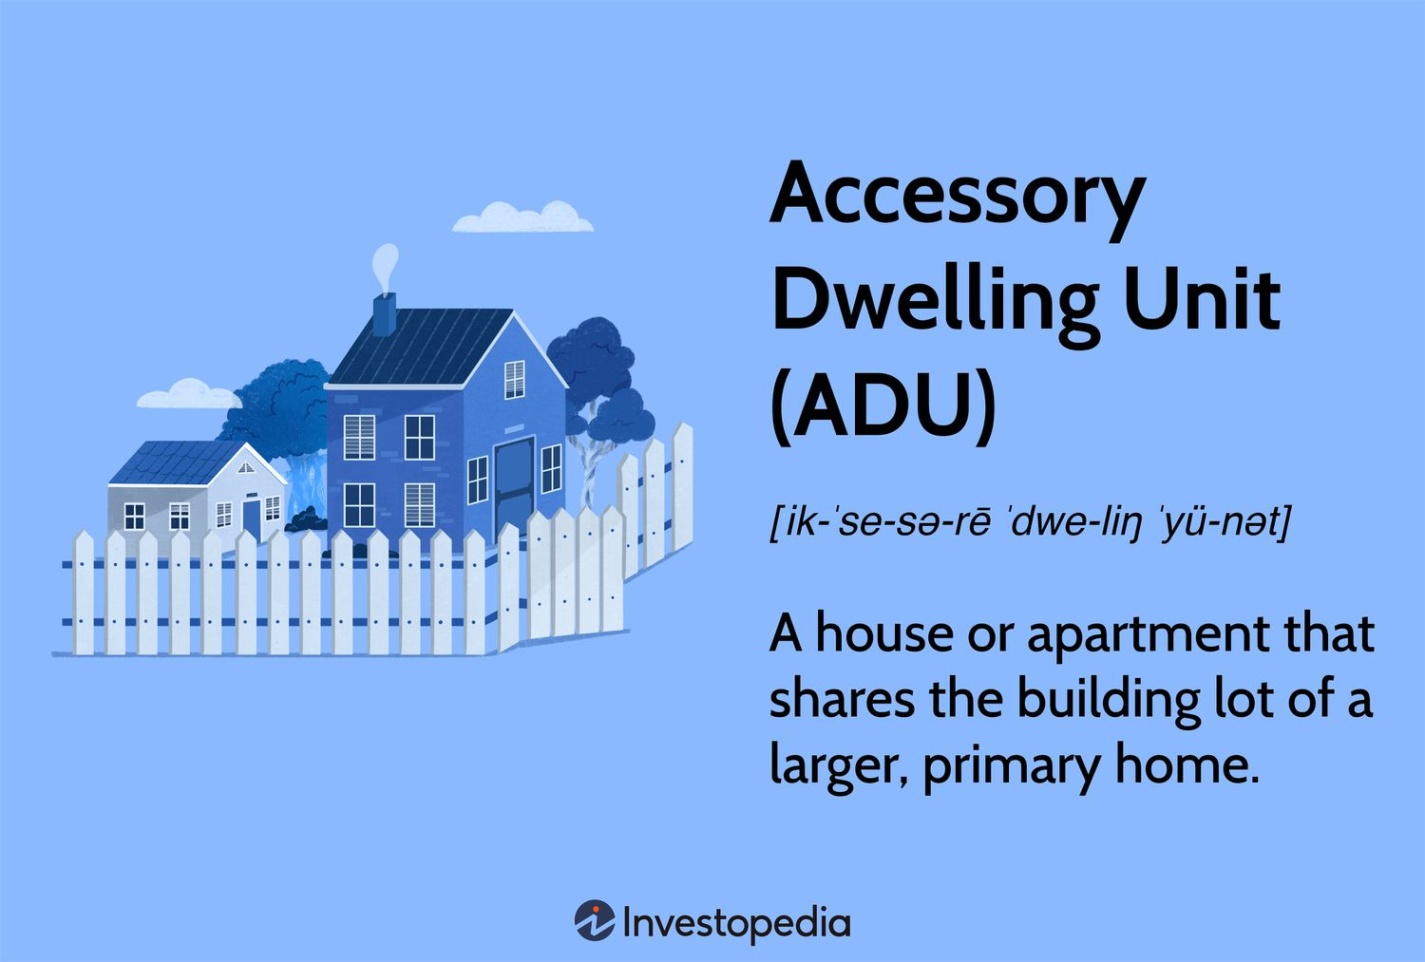 what is an accessory dwelling unit Niche Utama Home Accessory Dwelling Unit (ADU): Definition, Cost, and Value Add